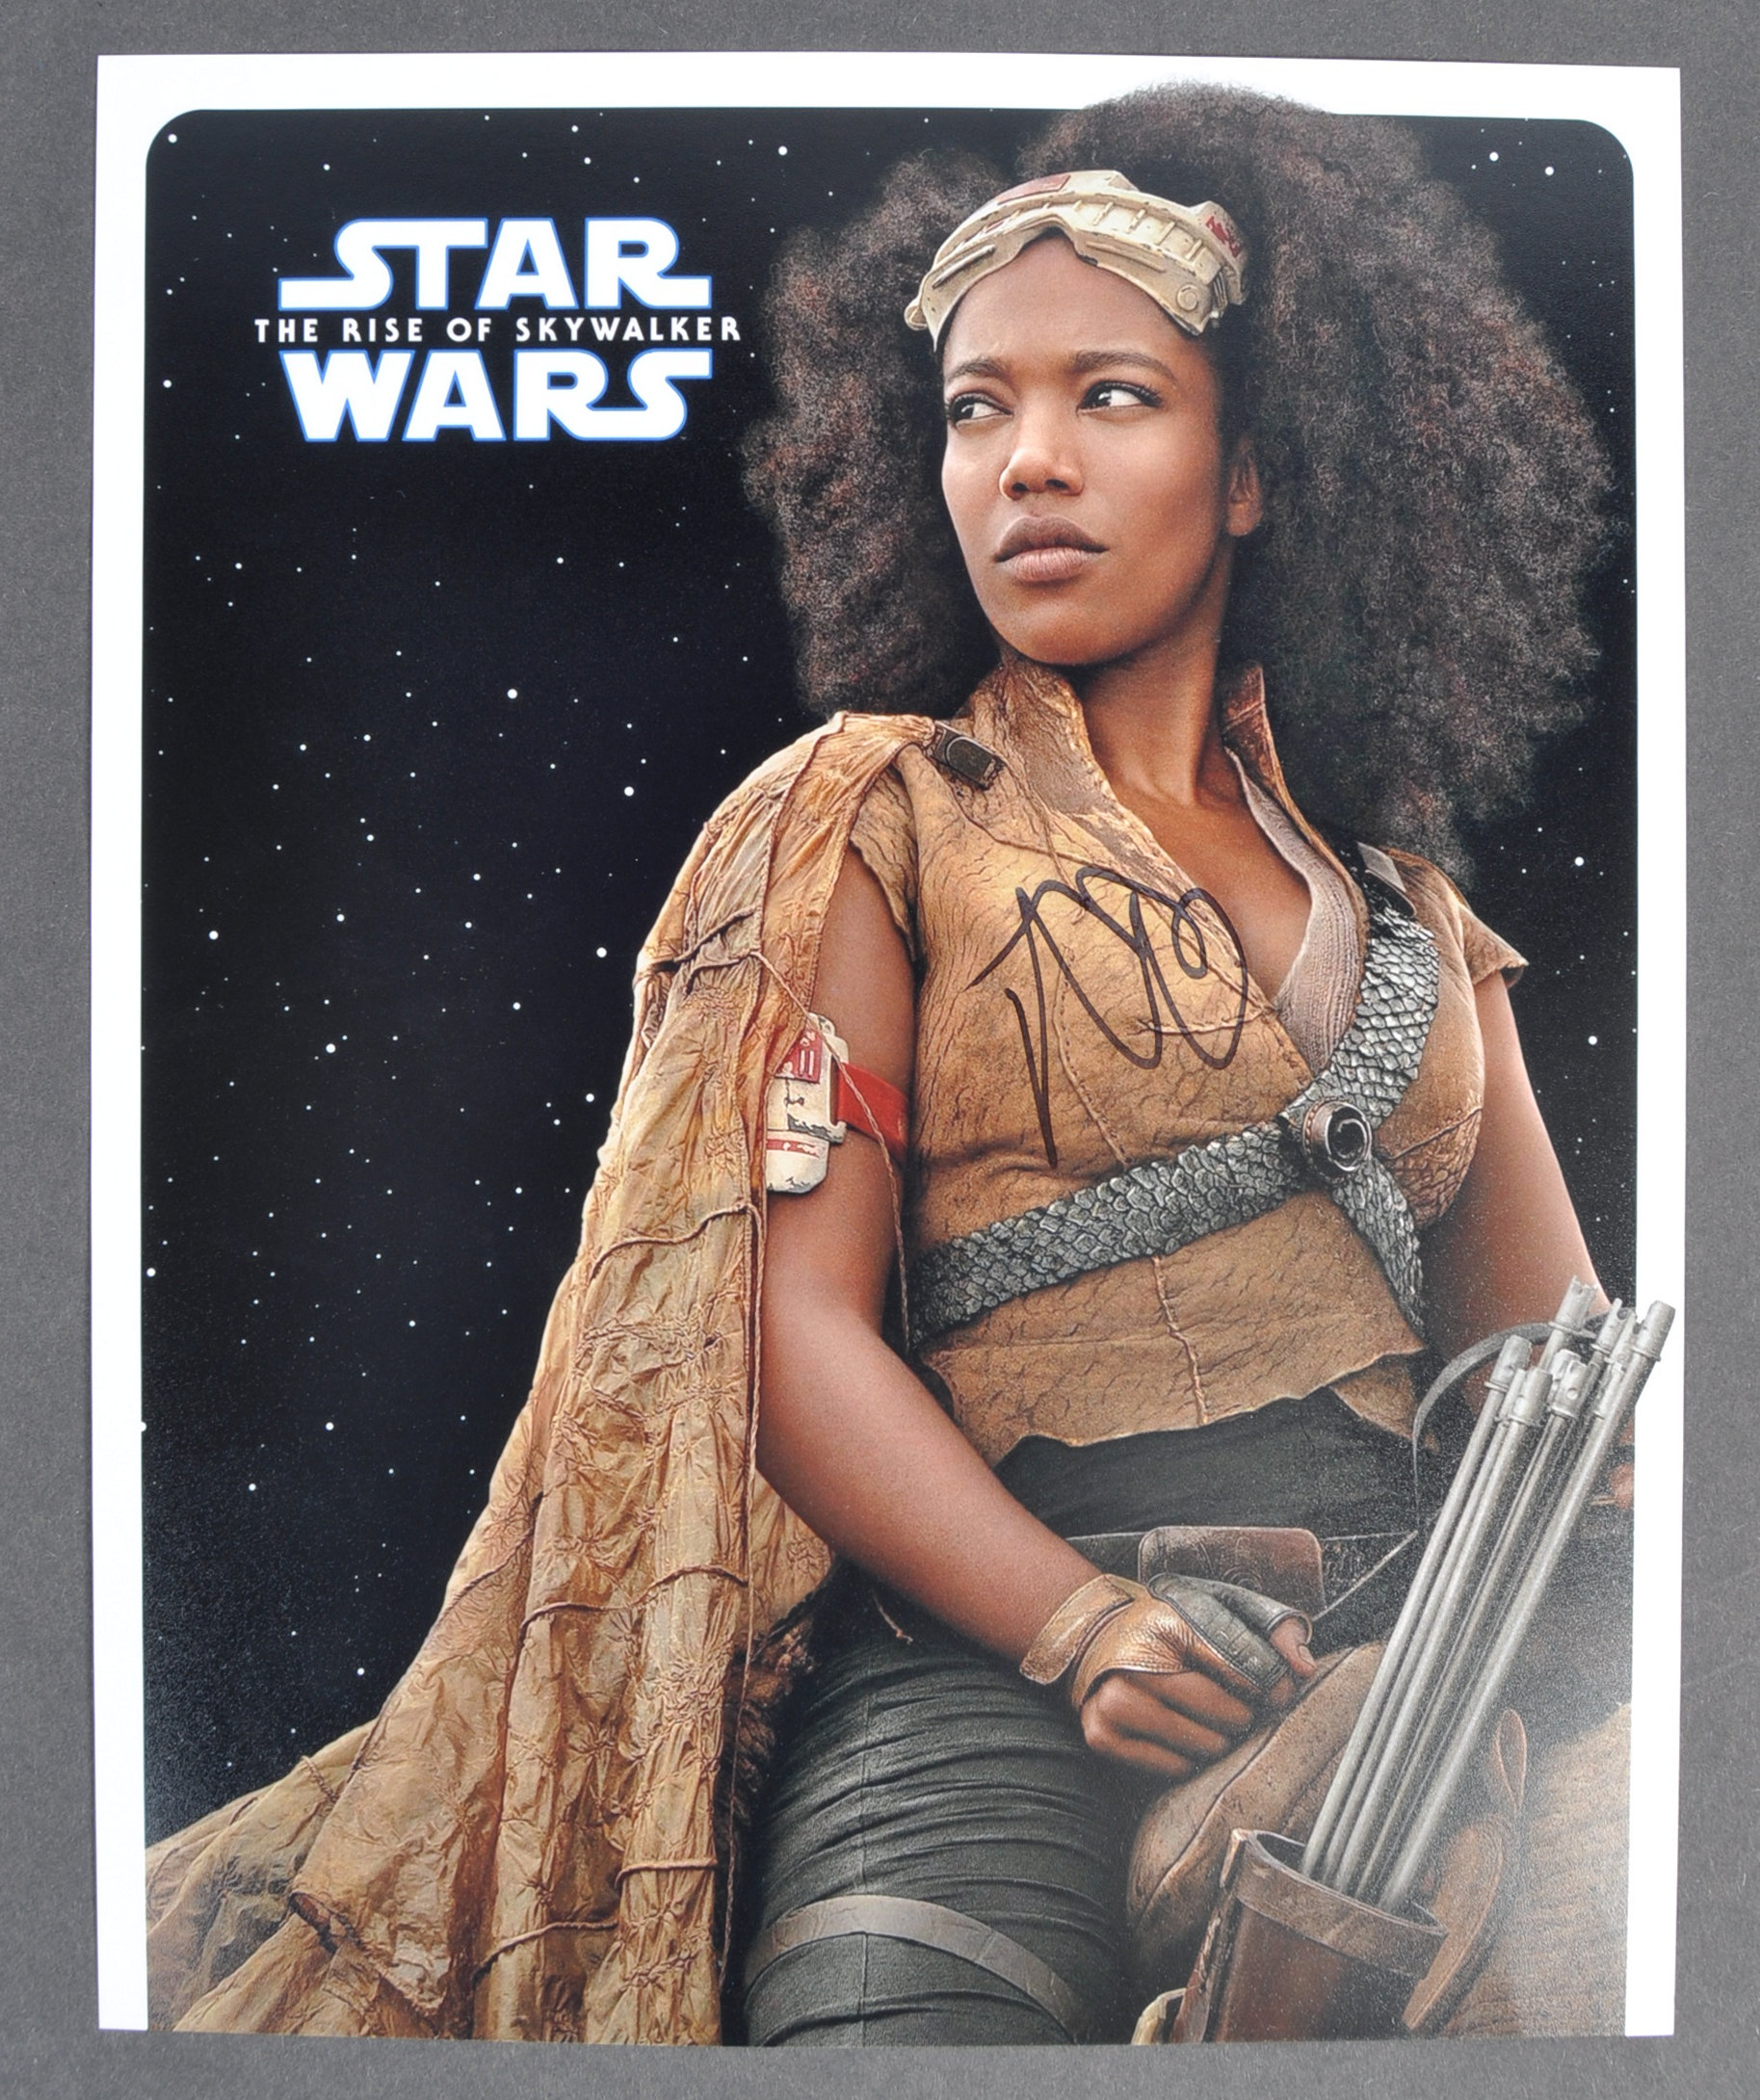 STAR WARS - NAOMI ACKIE - SIGNED 8X10" PHOTOGRAPH